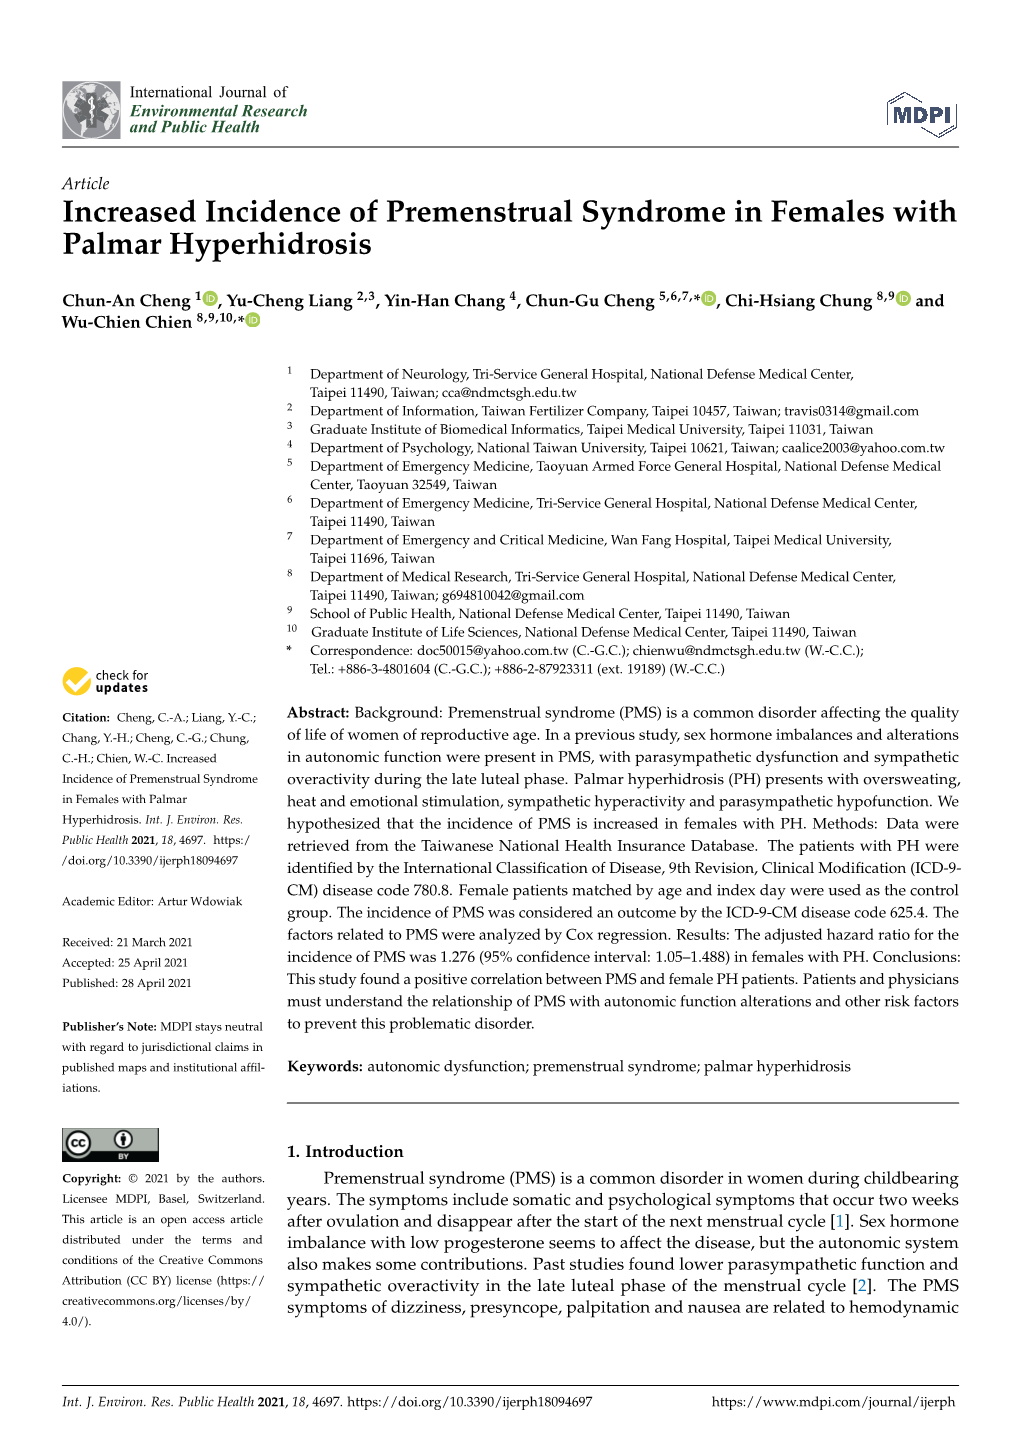 Increased Incidence of Premenstrual Syndrome in Females with Palmar Hyperhidrosis